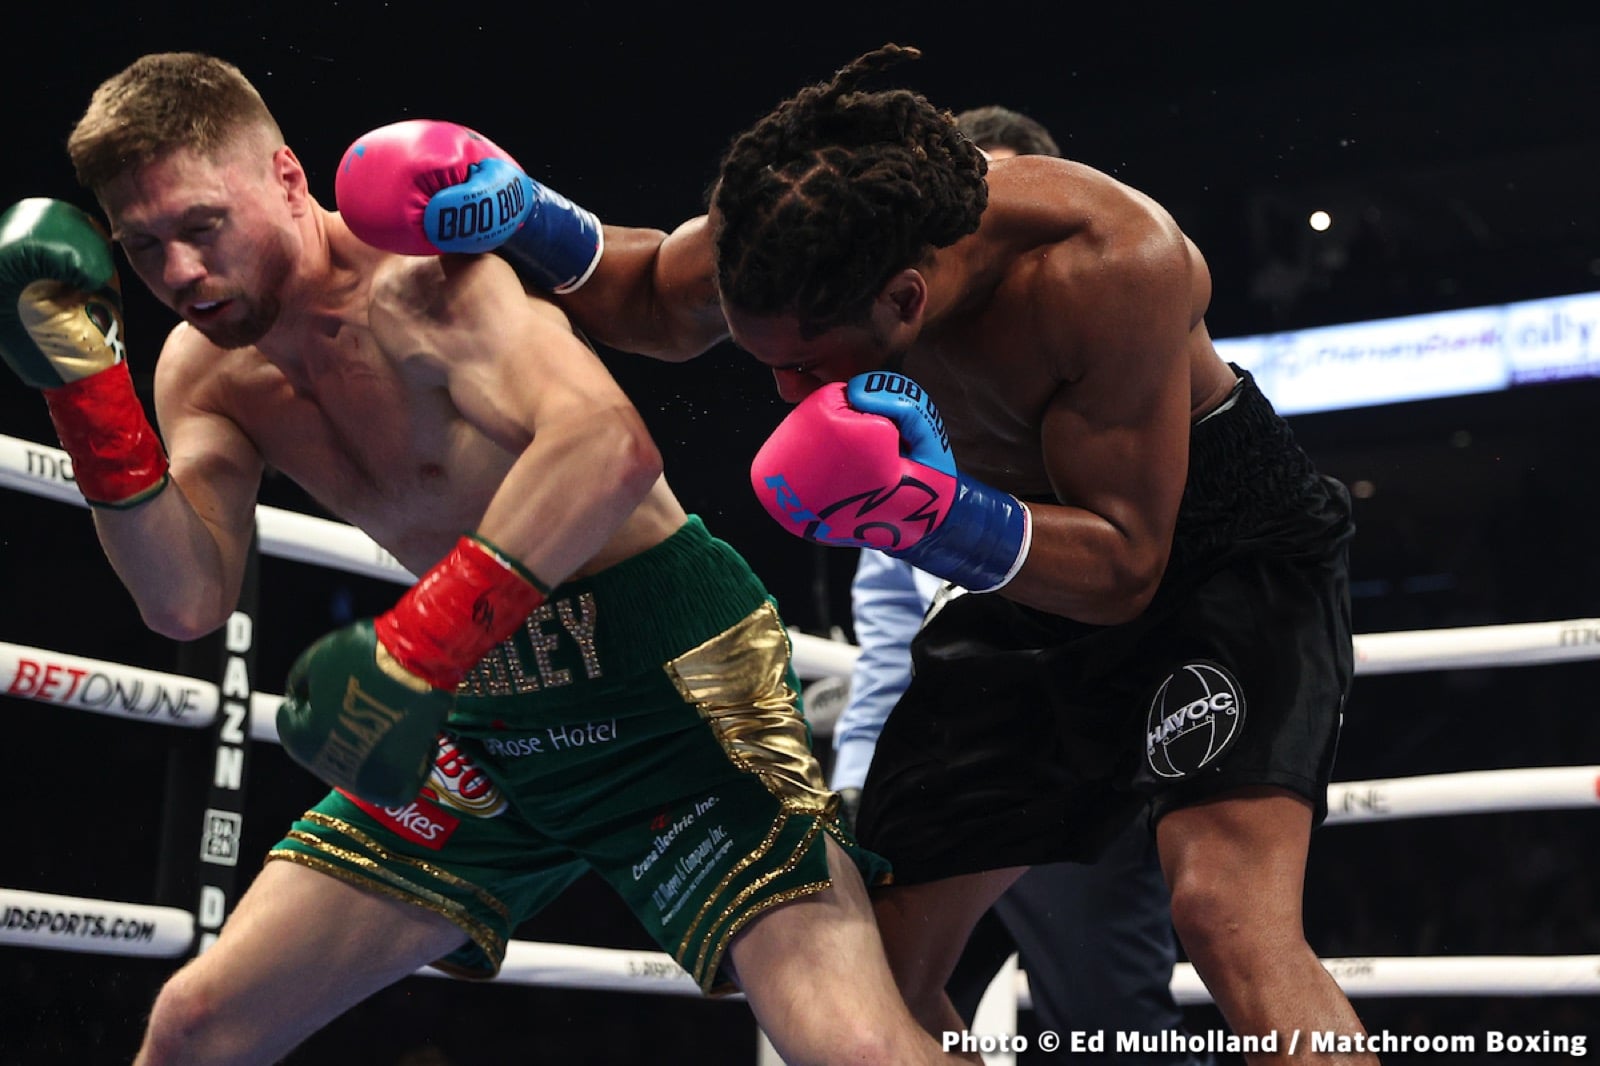 Demetrius Andrade vs. Jason Quigley - Live results from New Hampshire